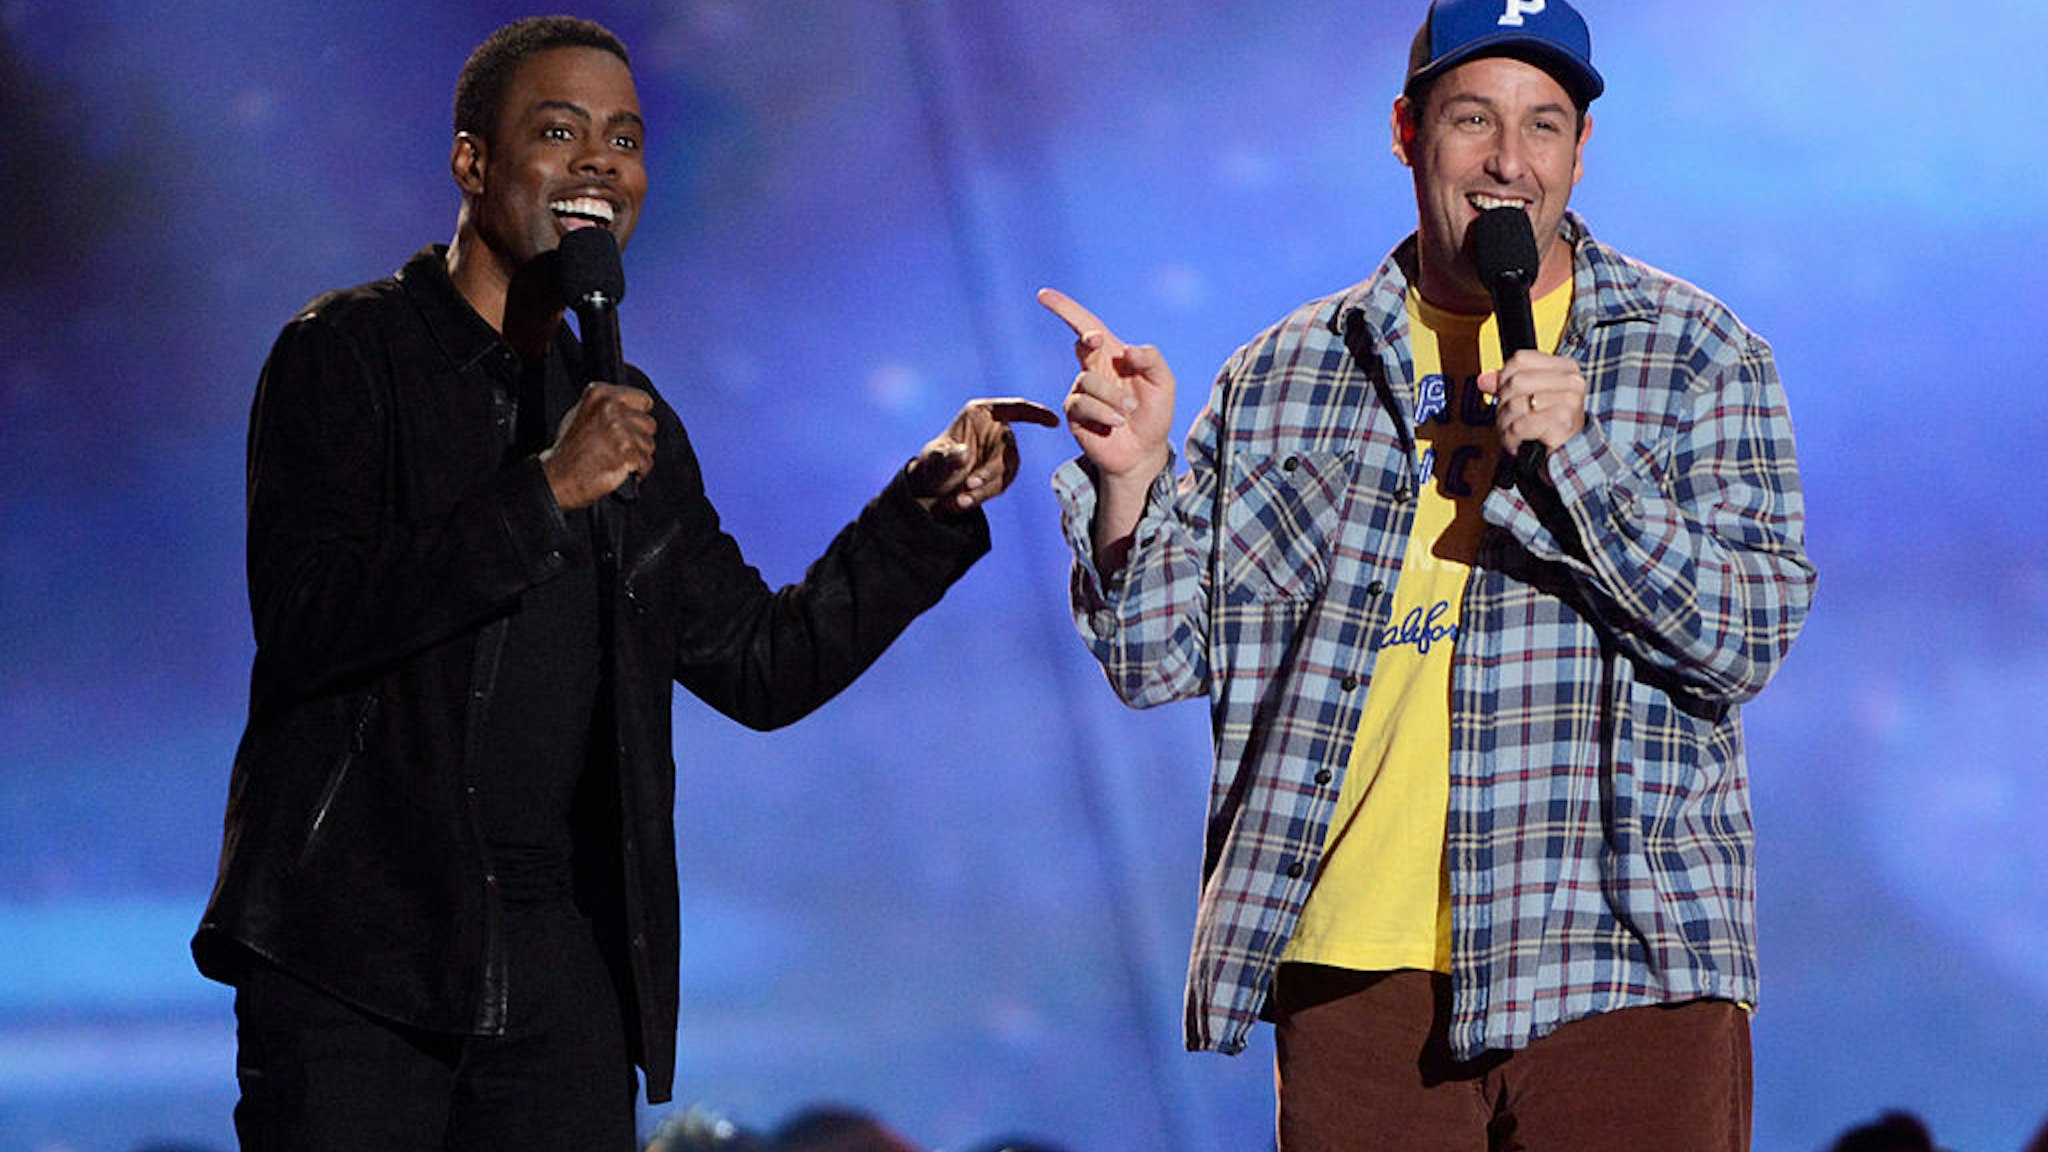 CULVER CITY, CA - APRIL 14: Actors Chris Rock (L) and Adam Sandler speak onstage during the 2013 MTV Movie Awards at Sony Pictures Studios on April 14, 2013 in Culver City, California. (Photo by Kevin Mazur/WireImage)